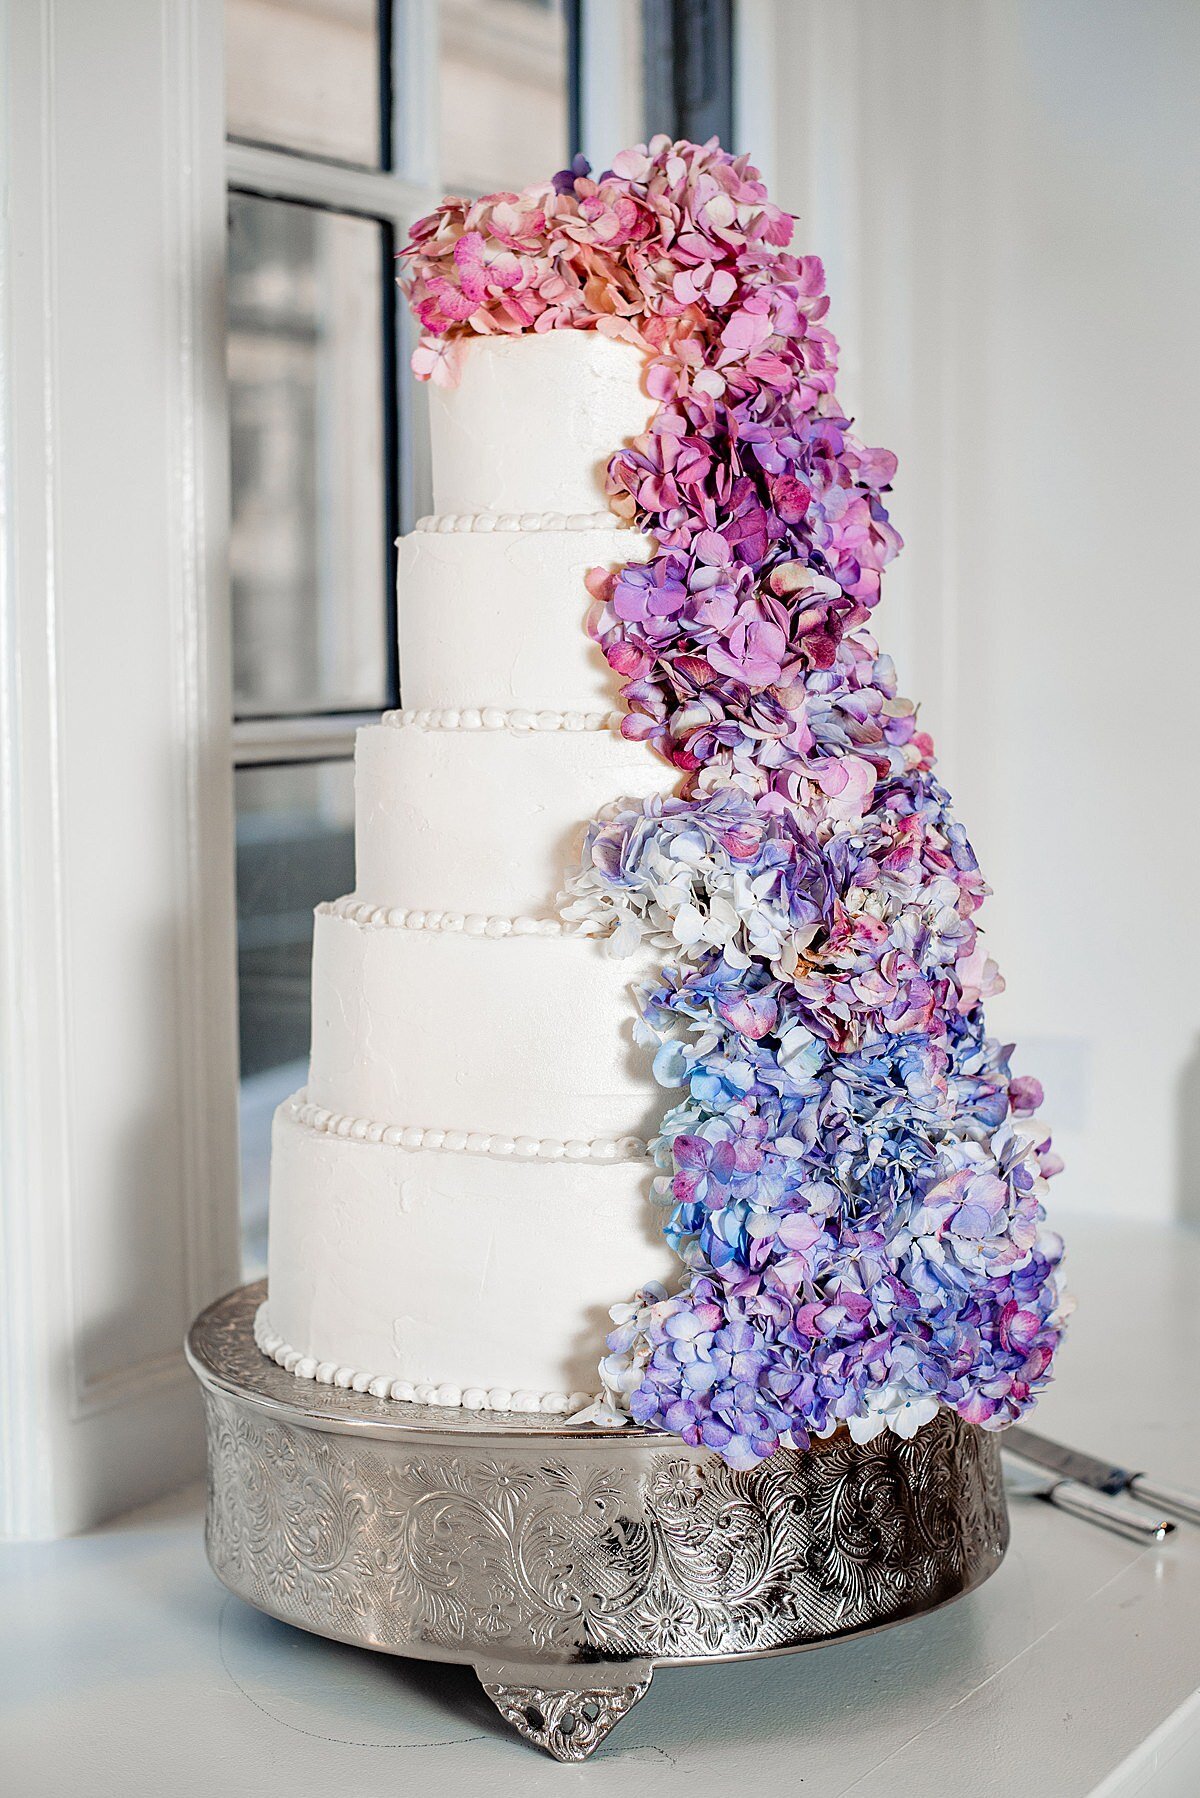 Five tier wedding cake with white pearls and a cascade of ombre hydrangea flowers ranging from pink hydrangea to purple hydrangea to blue hydrangea sitting on a silver cake stand at Noelle Hotel Nashville